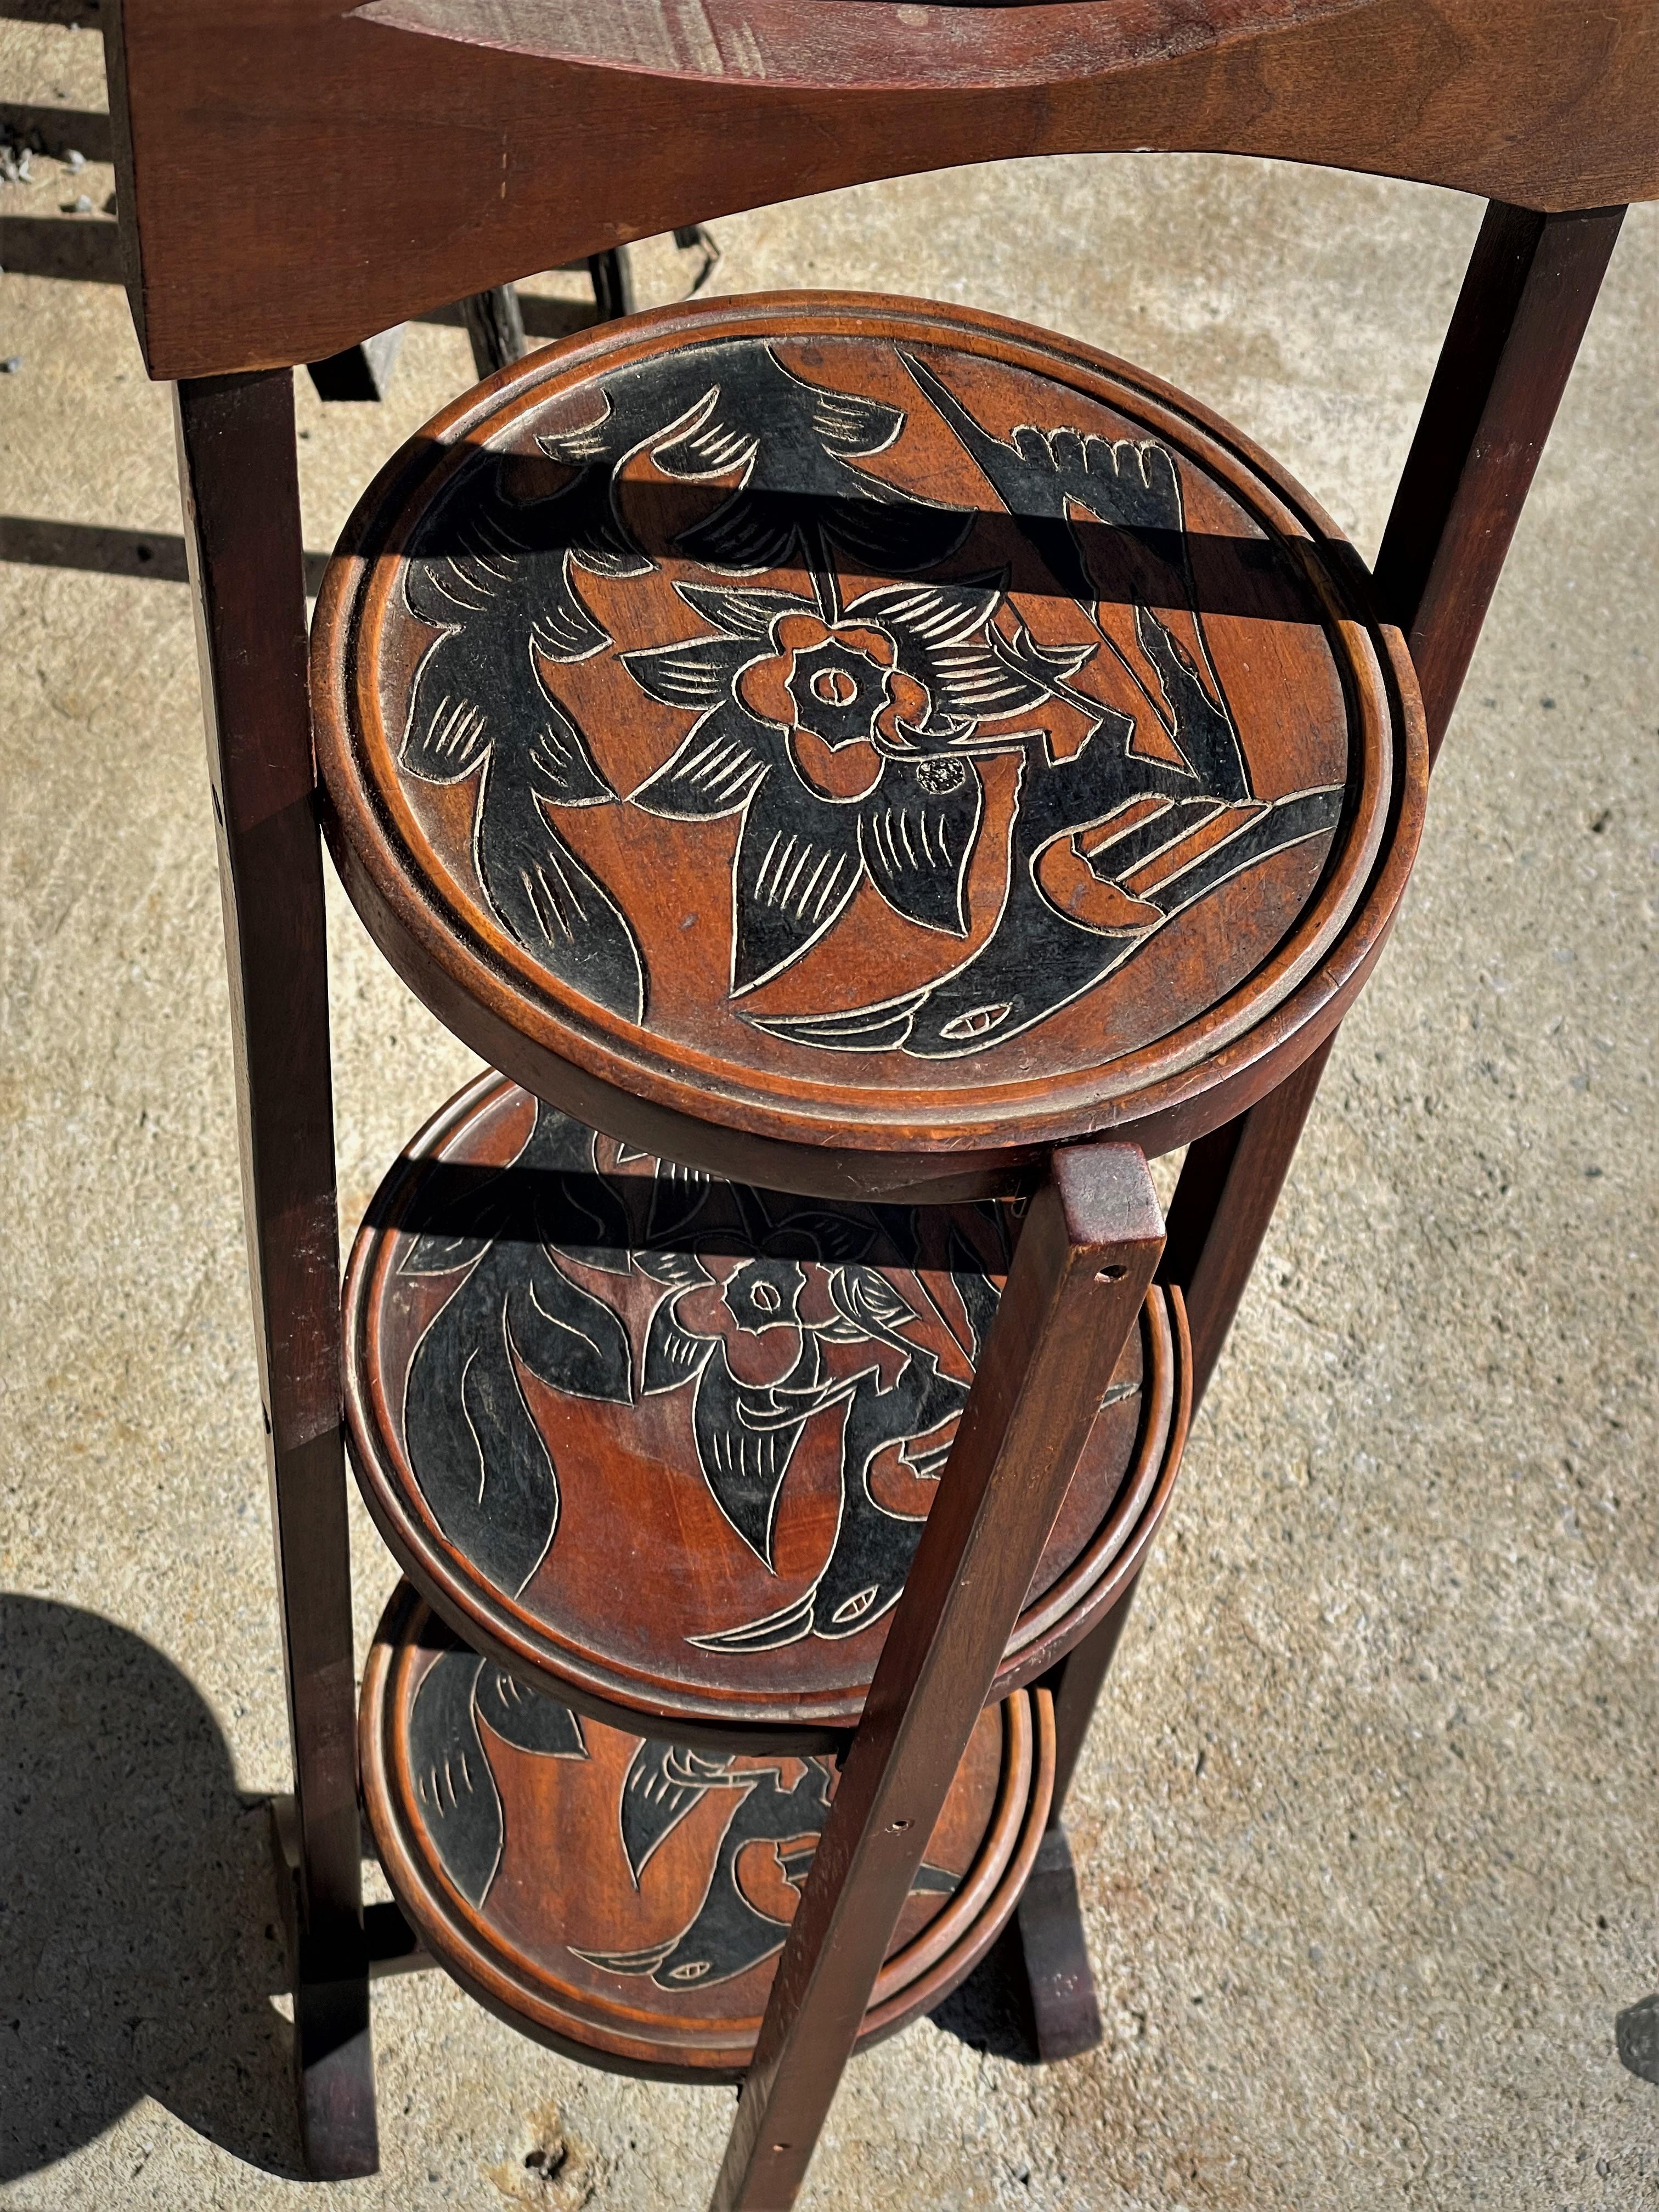 Mid 20th Century Folding Muffineer Muffin Pie Stand Tropical Bird & Flower Motif In Good Condition For Sale In Clifton Forge, VA